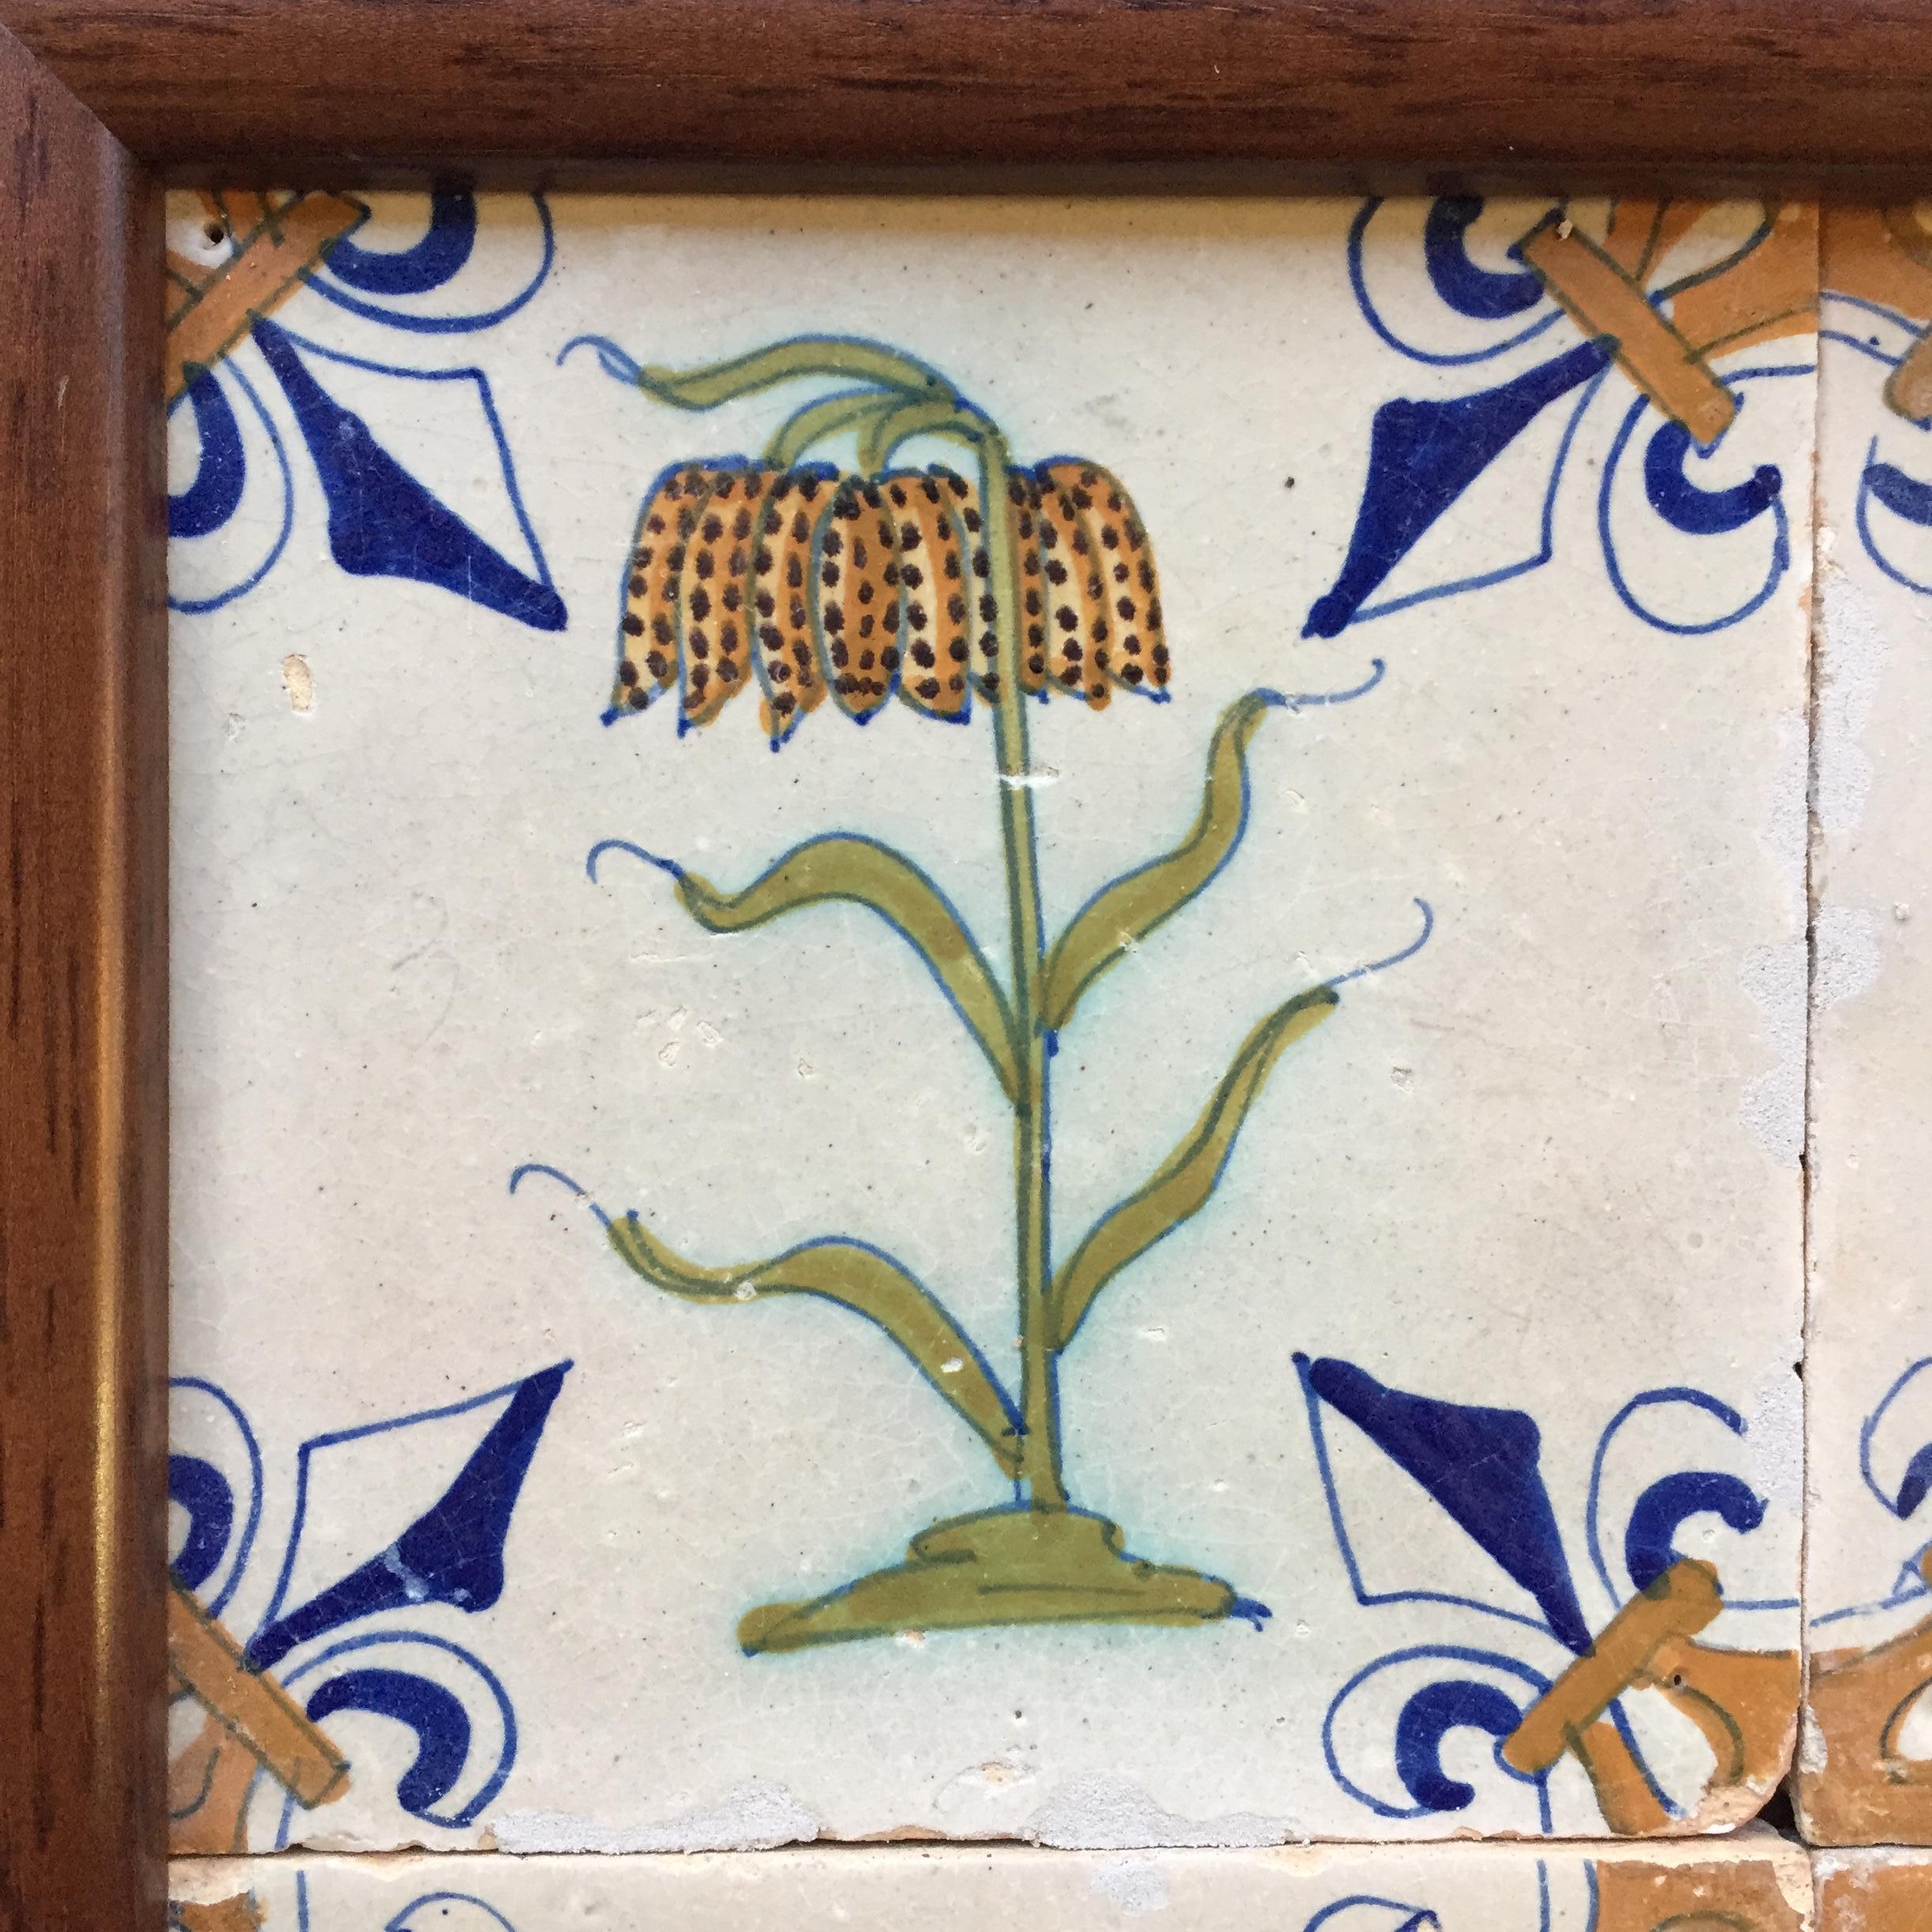 A set of 4 polychrome Dutch Delft tiles with flowers. 
Made in The Netherlands.
Circa 1620 - 1640.

A fine set of four tiles with flowers of one firing.
A Fritillary, Imperial crown flower, and more wonderful flowers.
On the tile with the